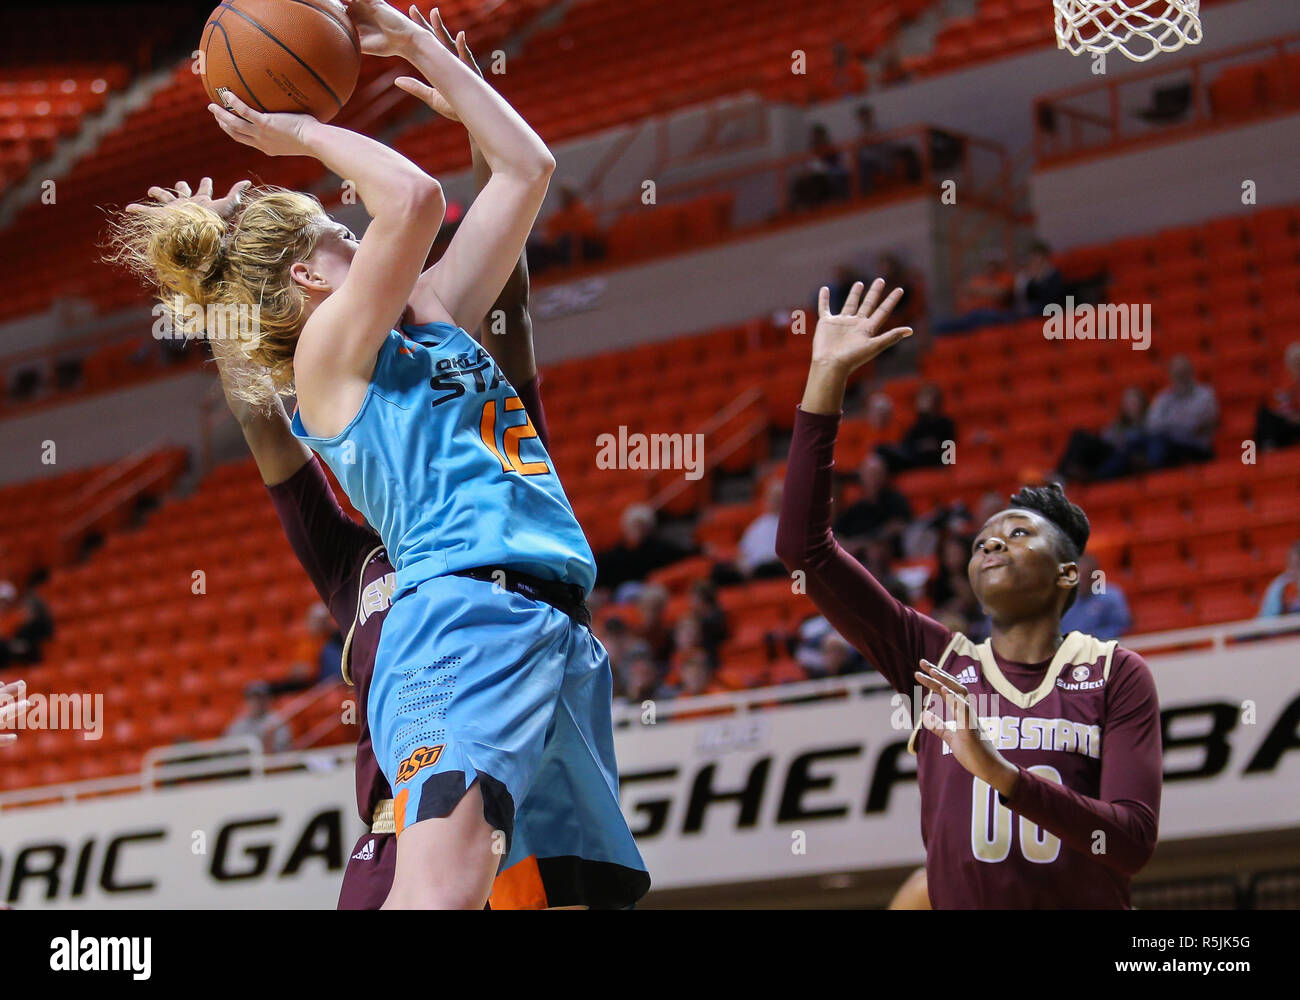 Stillwater, OK, USA. 30th Nov, 2018. Oklahoma State Forward Vivian Gray (12) attempts a shot during a basketball game between the Texas State Bobcats and Oklahoma State Cowgirls at Gallagher-Iba Arena in Stillwater, OK. Gray Siegel/CSM/Alamy Live News Stock Photo